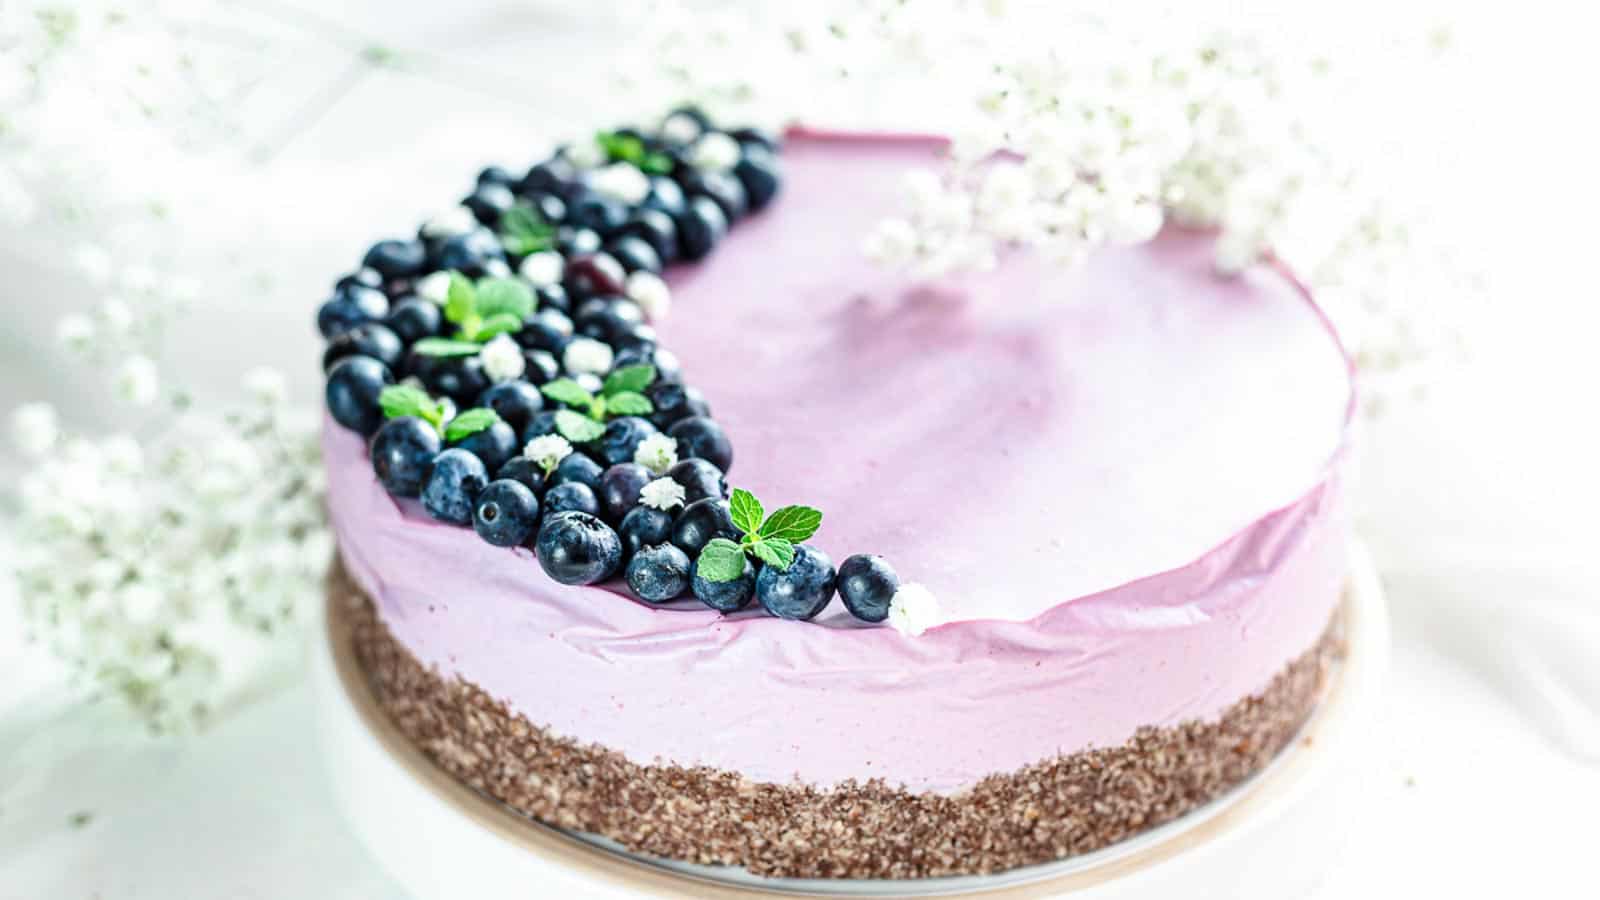 No Bake Blueberry Cheesecake with blueberries on top. 